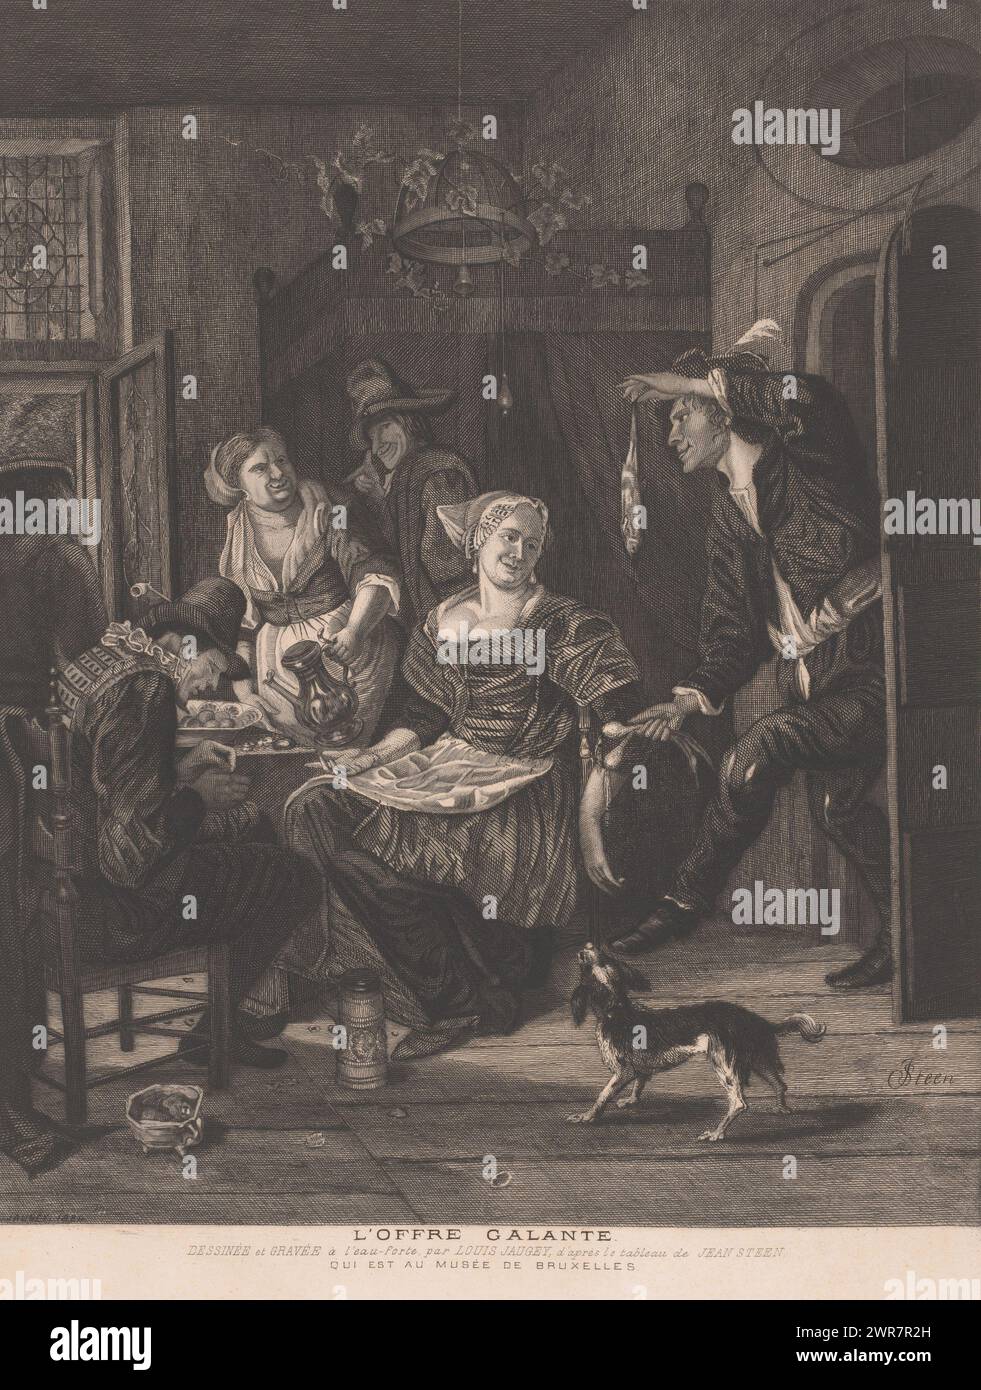 Man walks into a room with company at the table and offers a fish, The Love Offer, L'Offre galante (title on object), print maker: Louis Jaugey, after painting by: Jan Havicksz. Steen, 1884, paper, etching, engraving, height 510 mm, width 291 mm, print Stock Photo